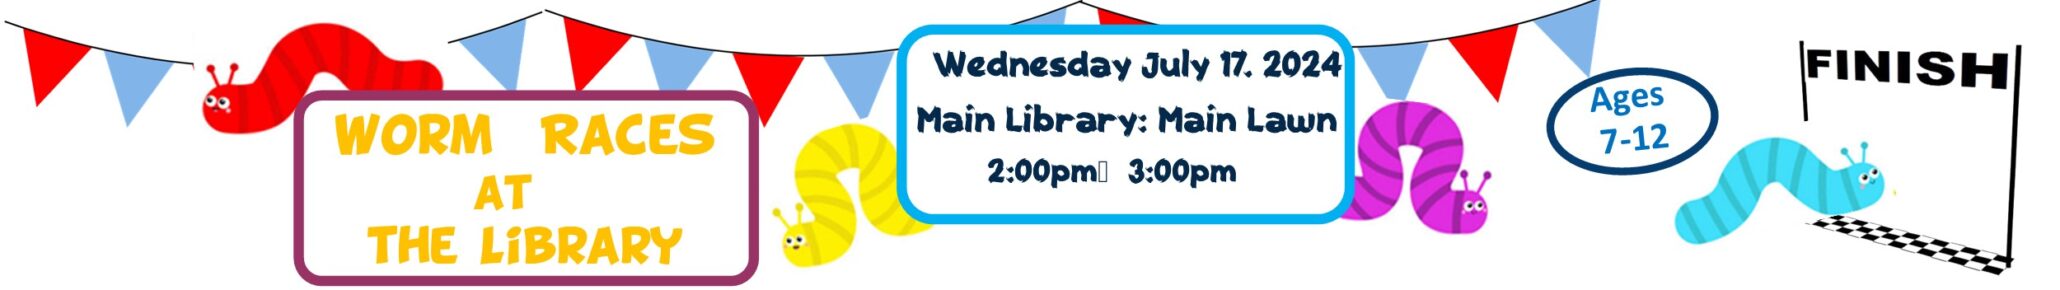 worm races at the main library on july 17